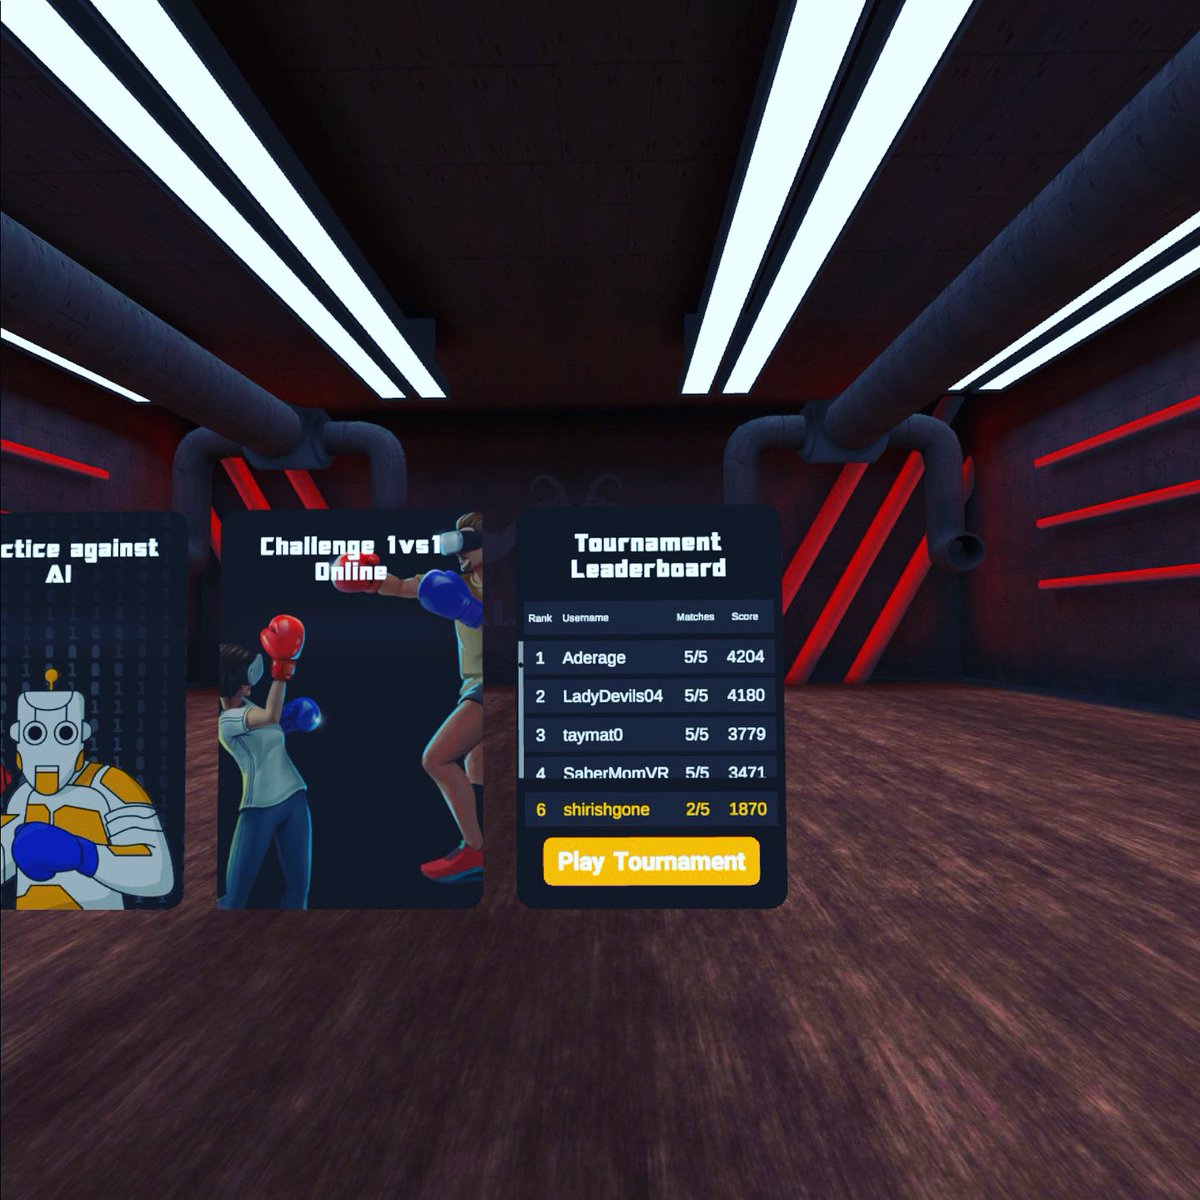 As we come to the end of @SaberMomVR #Boxing #Fitness Challenge. 
@aderage07 is at the top of the Leaderboard. 
Congratulations 🎉 
and great participation overall 👏
#VRFitness #VRFit #VRBoxing #VirtualReality #VR #Oculus #MetaQuest #Meta #Fitness